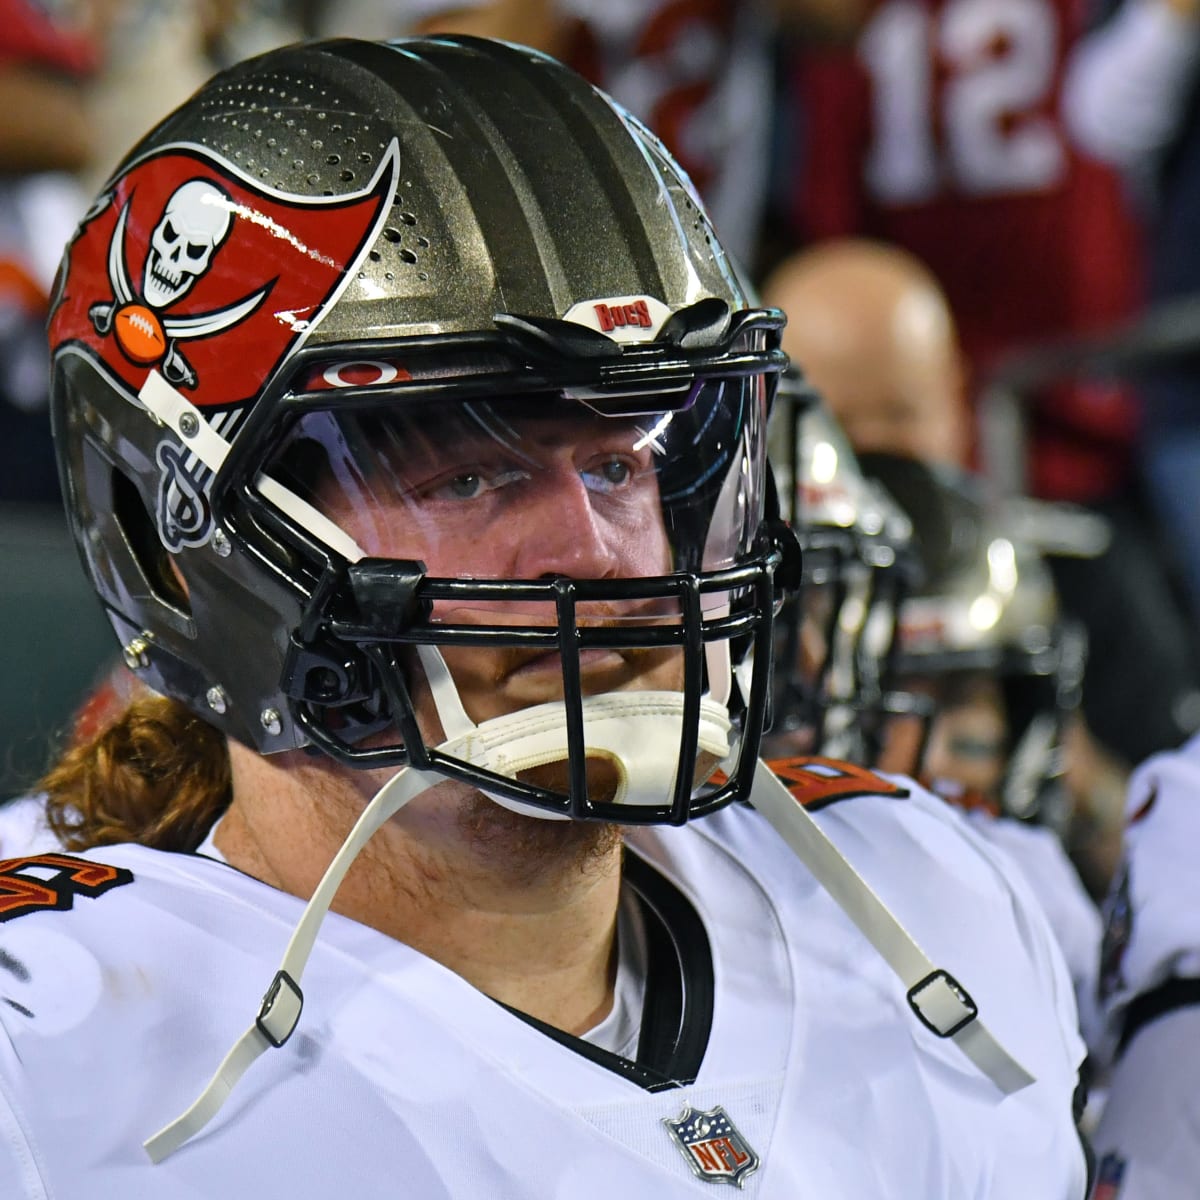 With Buccaneers' Ryan Jensen Out, Who Steps In?